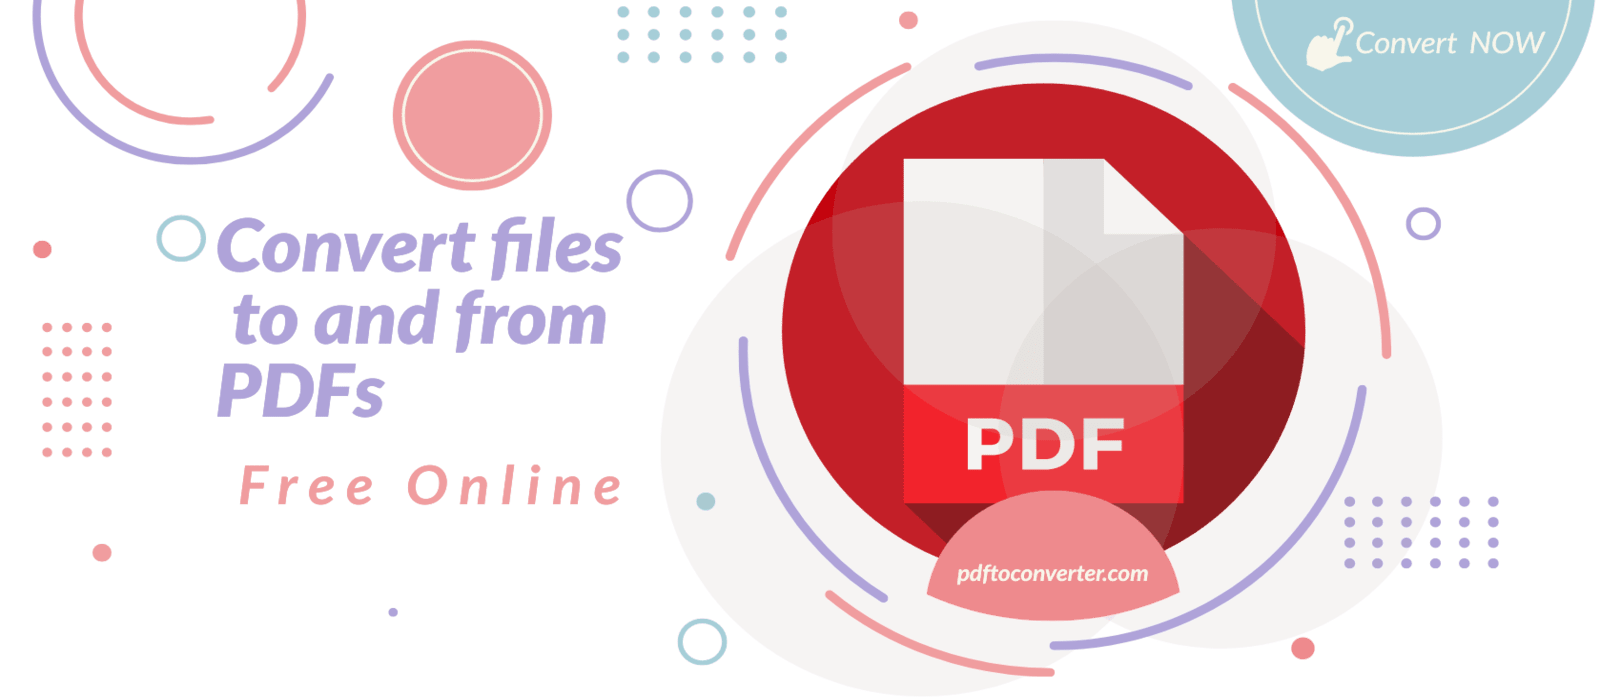 Effortlessly convert any file to PDF with PDFtoConverter's secure and user-friendly converter tools. Create, convert, and optimize your PDF documents for free